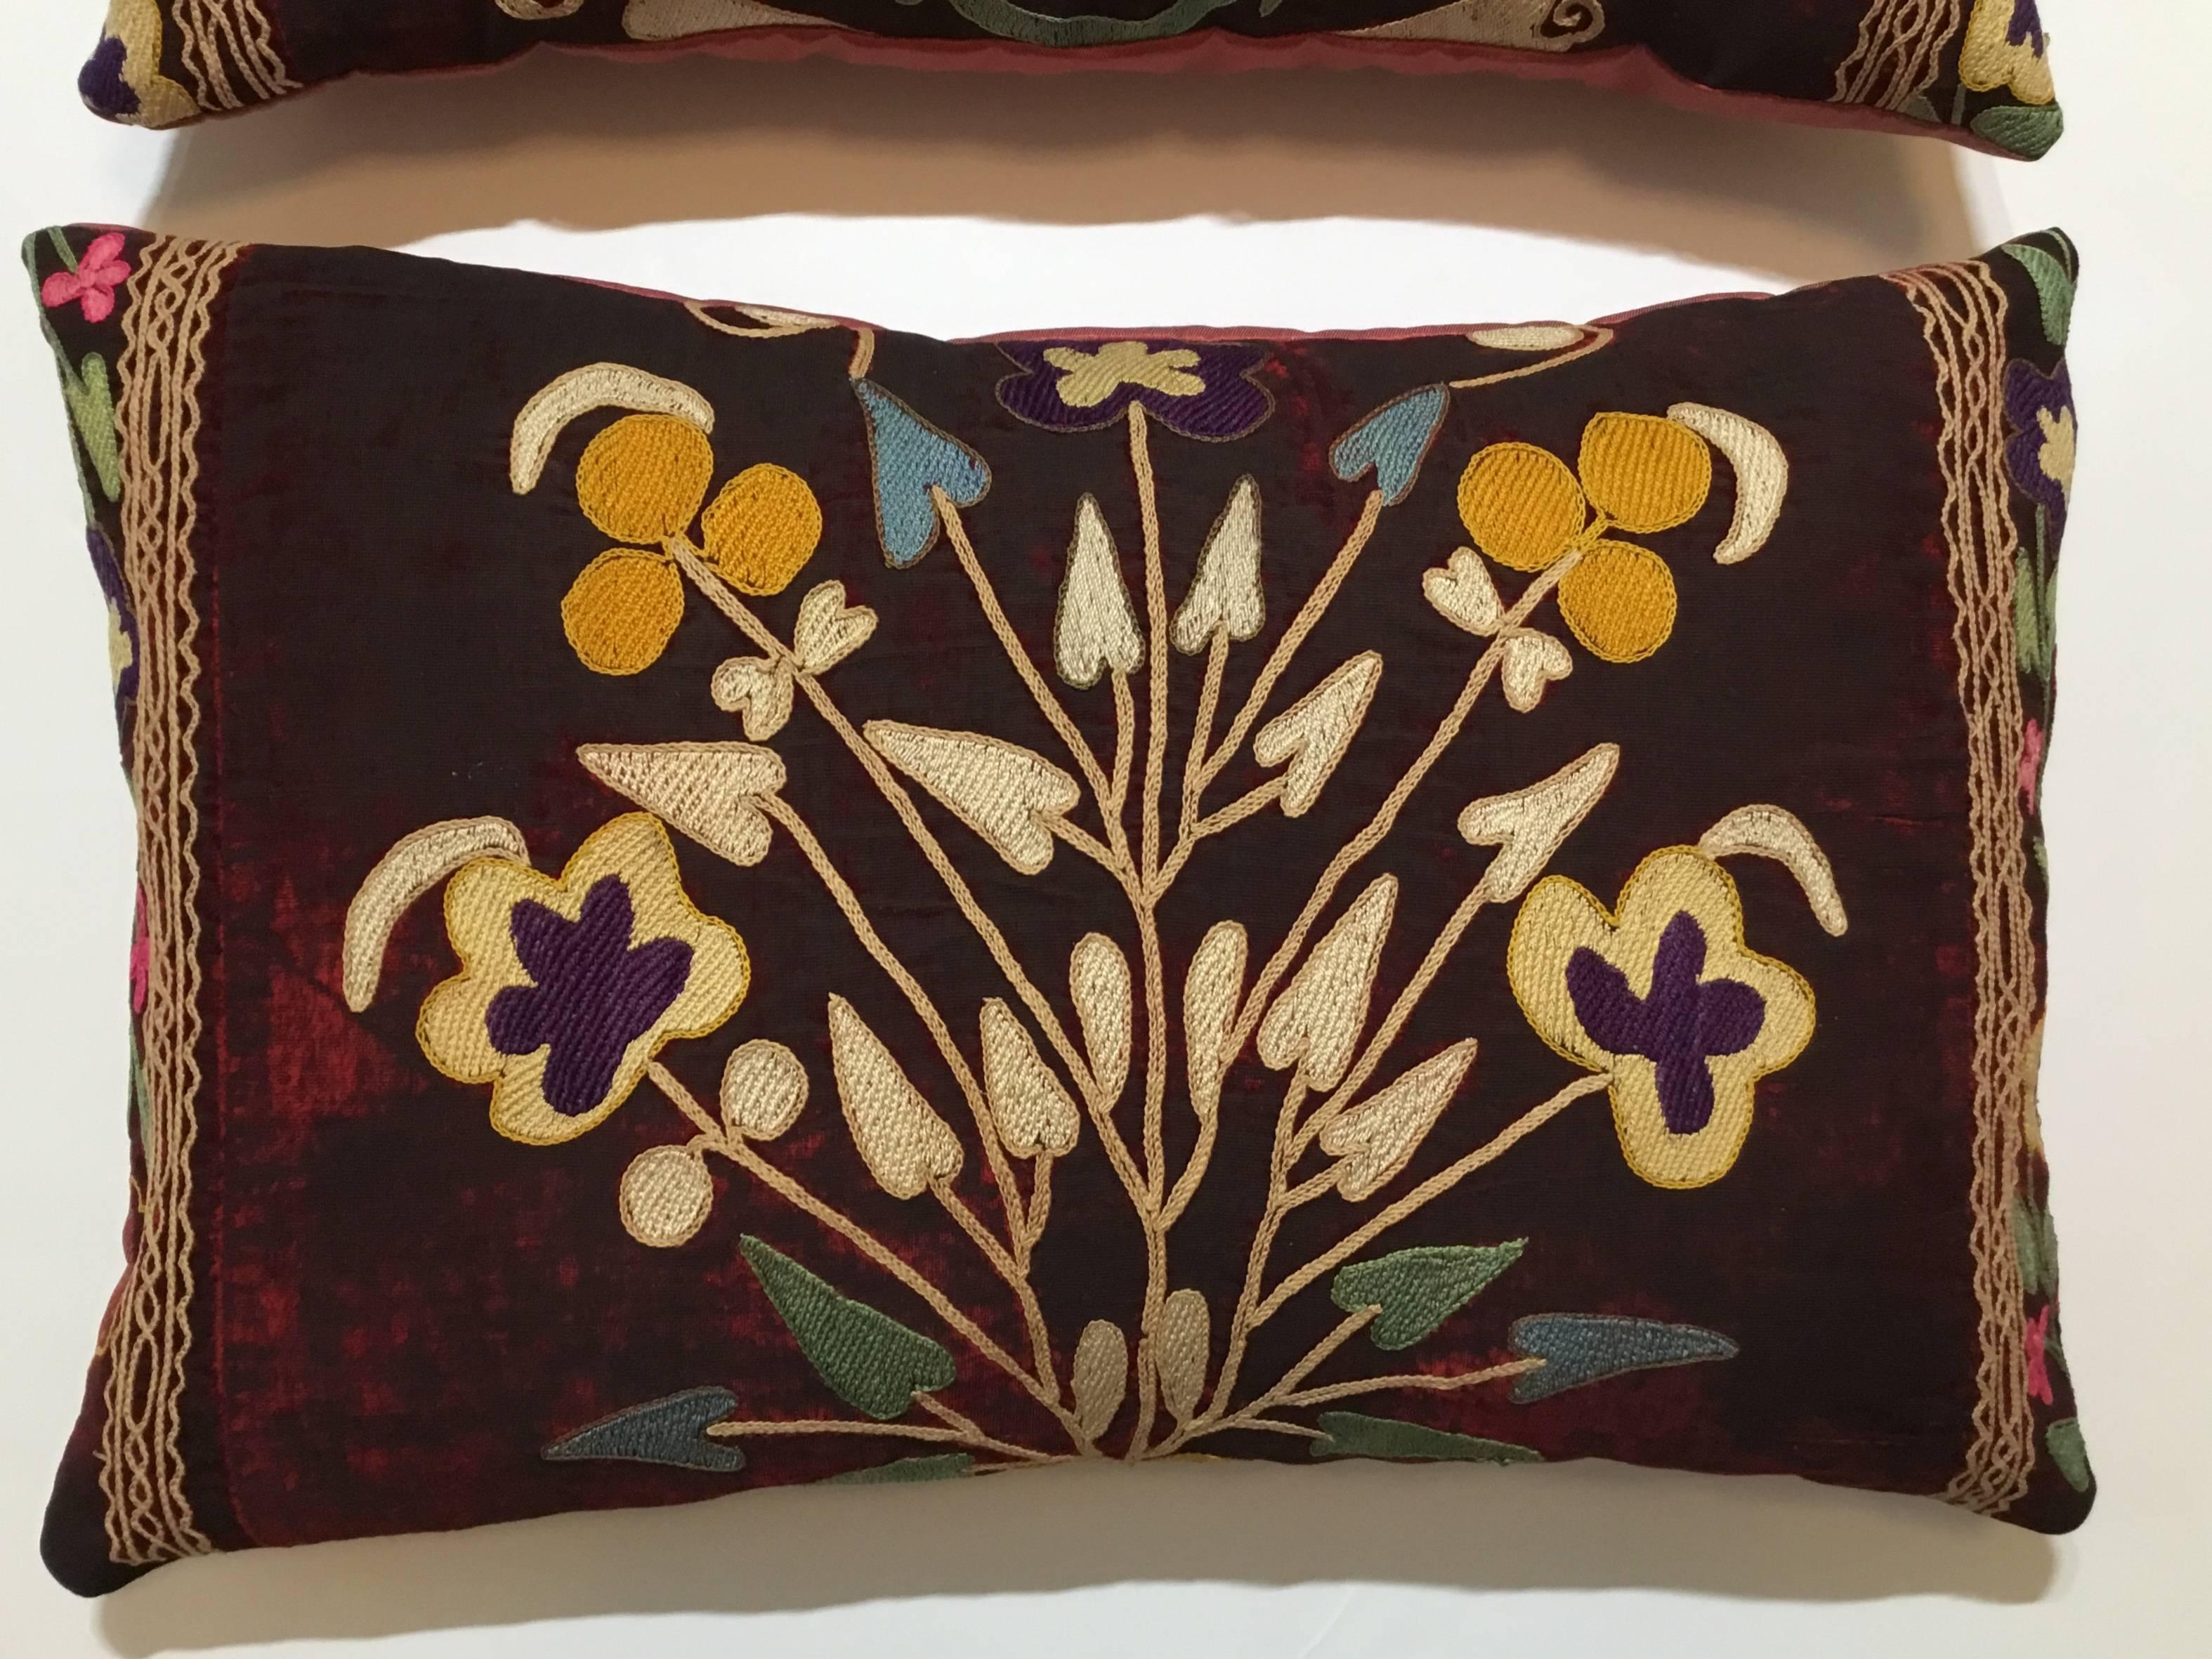 Exceptional pair of pillows made of antique hand embroidery Suzani fragment, beautiful colors of vine and floral motifs all embroidered on a antique oxidized wine color velvet. Quality backing, frash inserts. Great pair for room decoration.
 